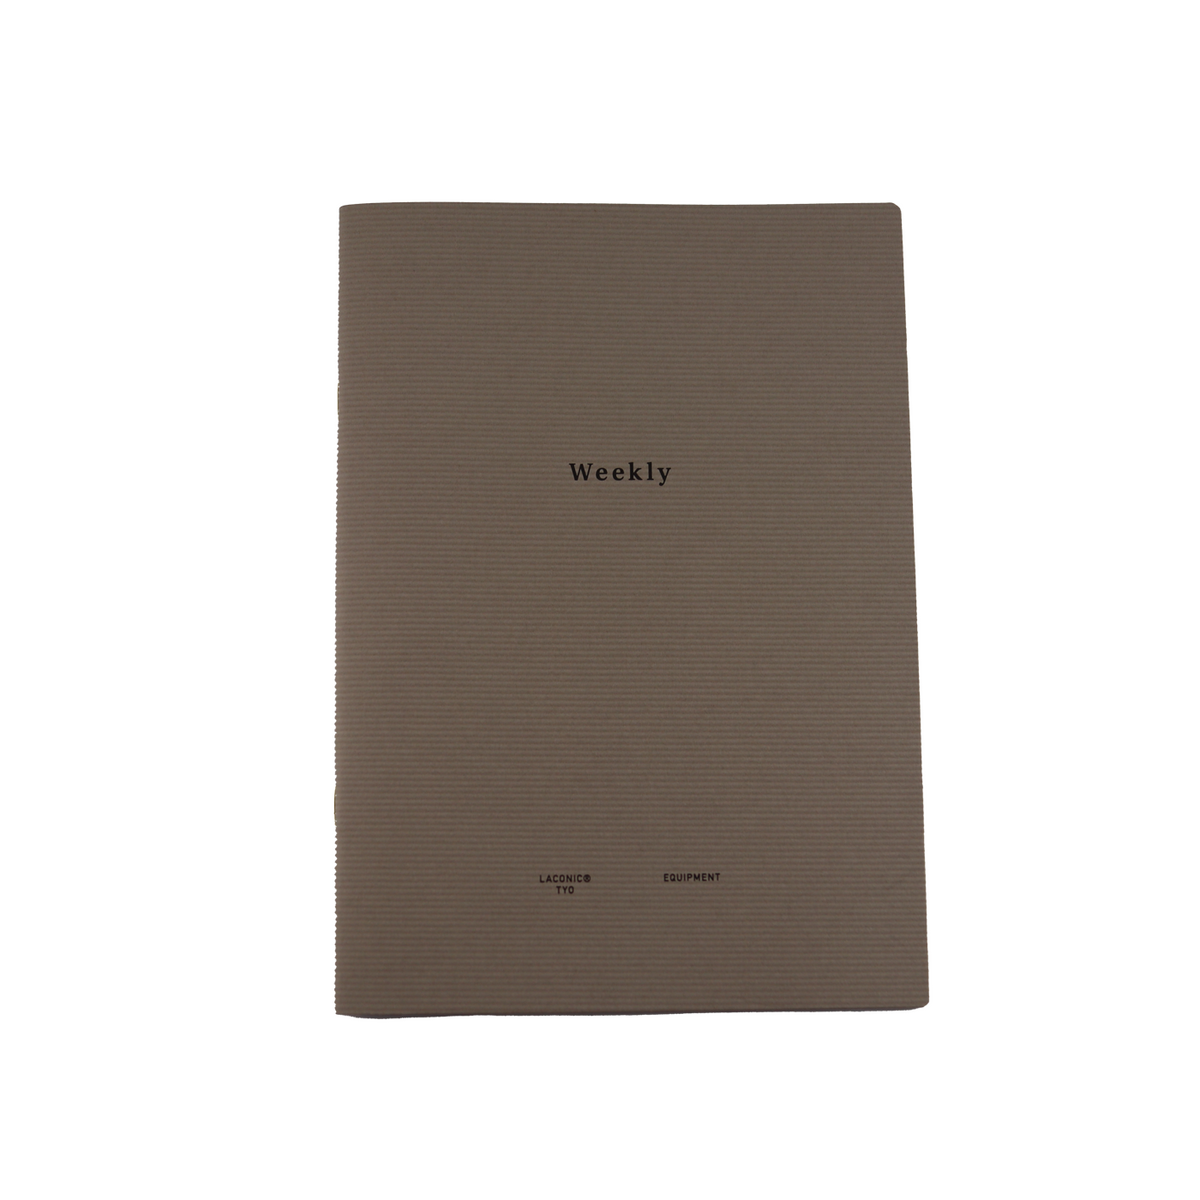 Laconic style Notebook A5 -Weekly